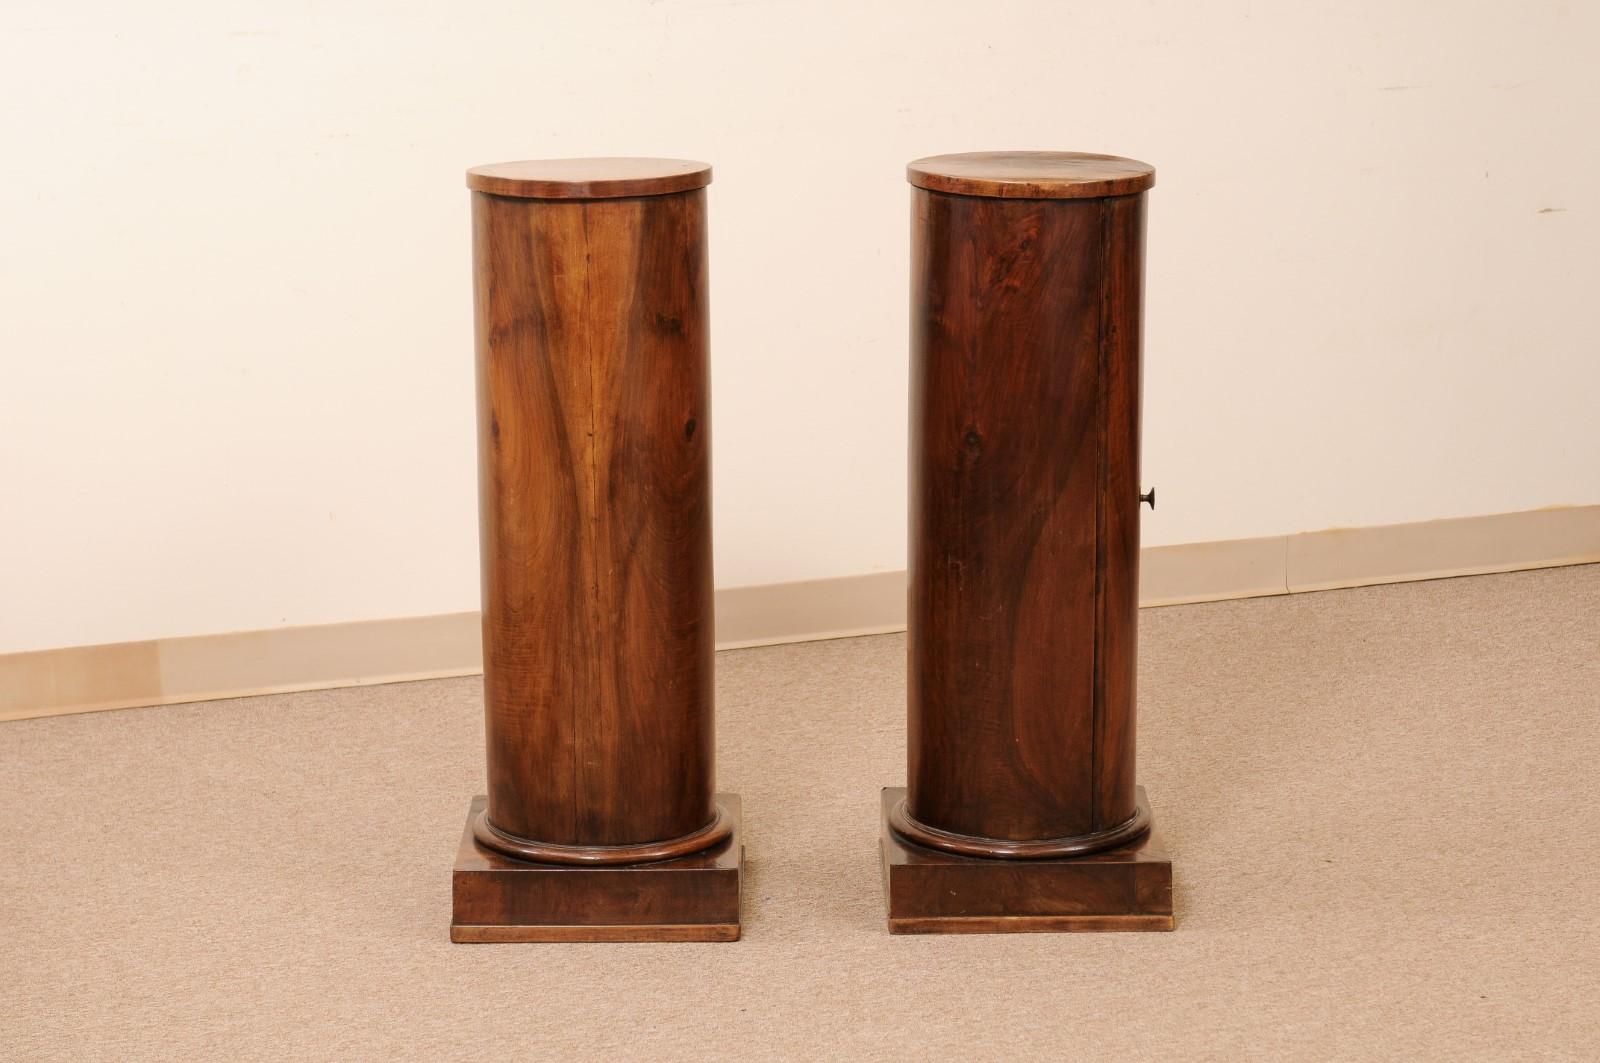 Pair of Early 19th Century Italian Neoclassical Walnut Pedestal Cabinets For Sale 5